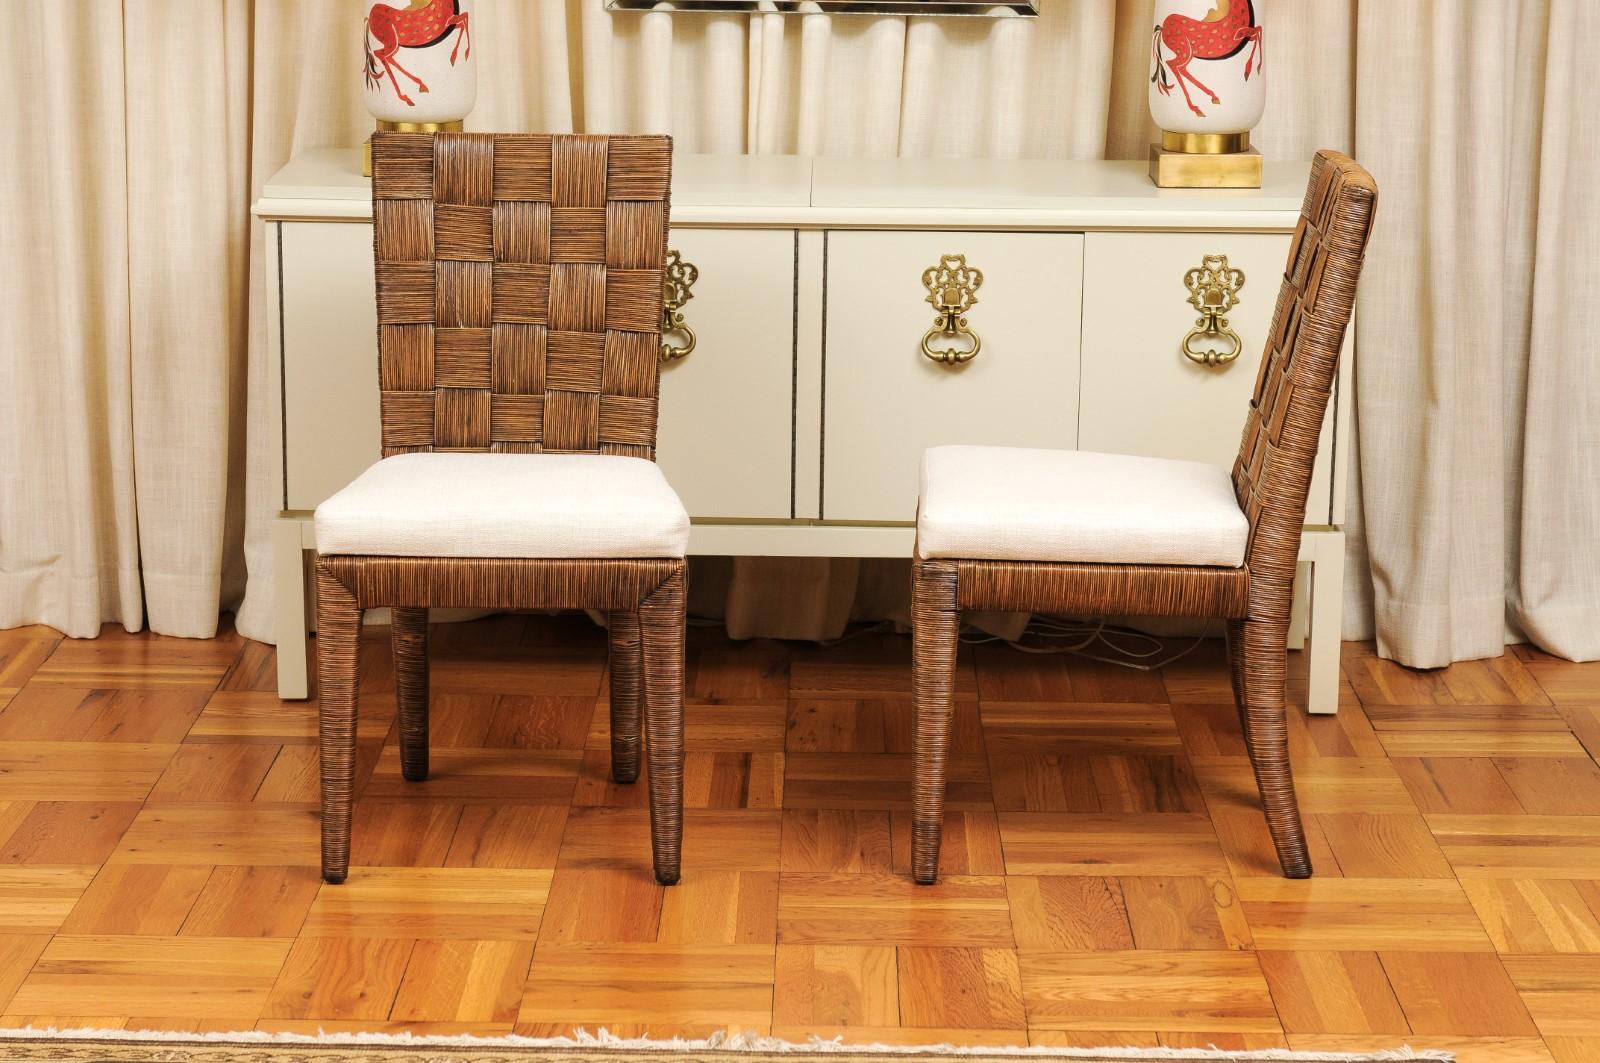 Stellar Restored Set of 8 Block Island Cane Chairs by John Hutton for Donghia For Sale 9